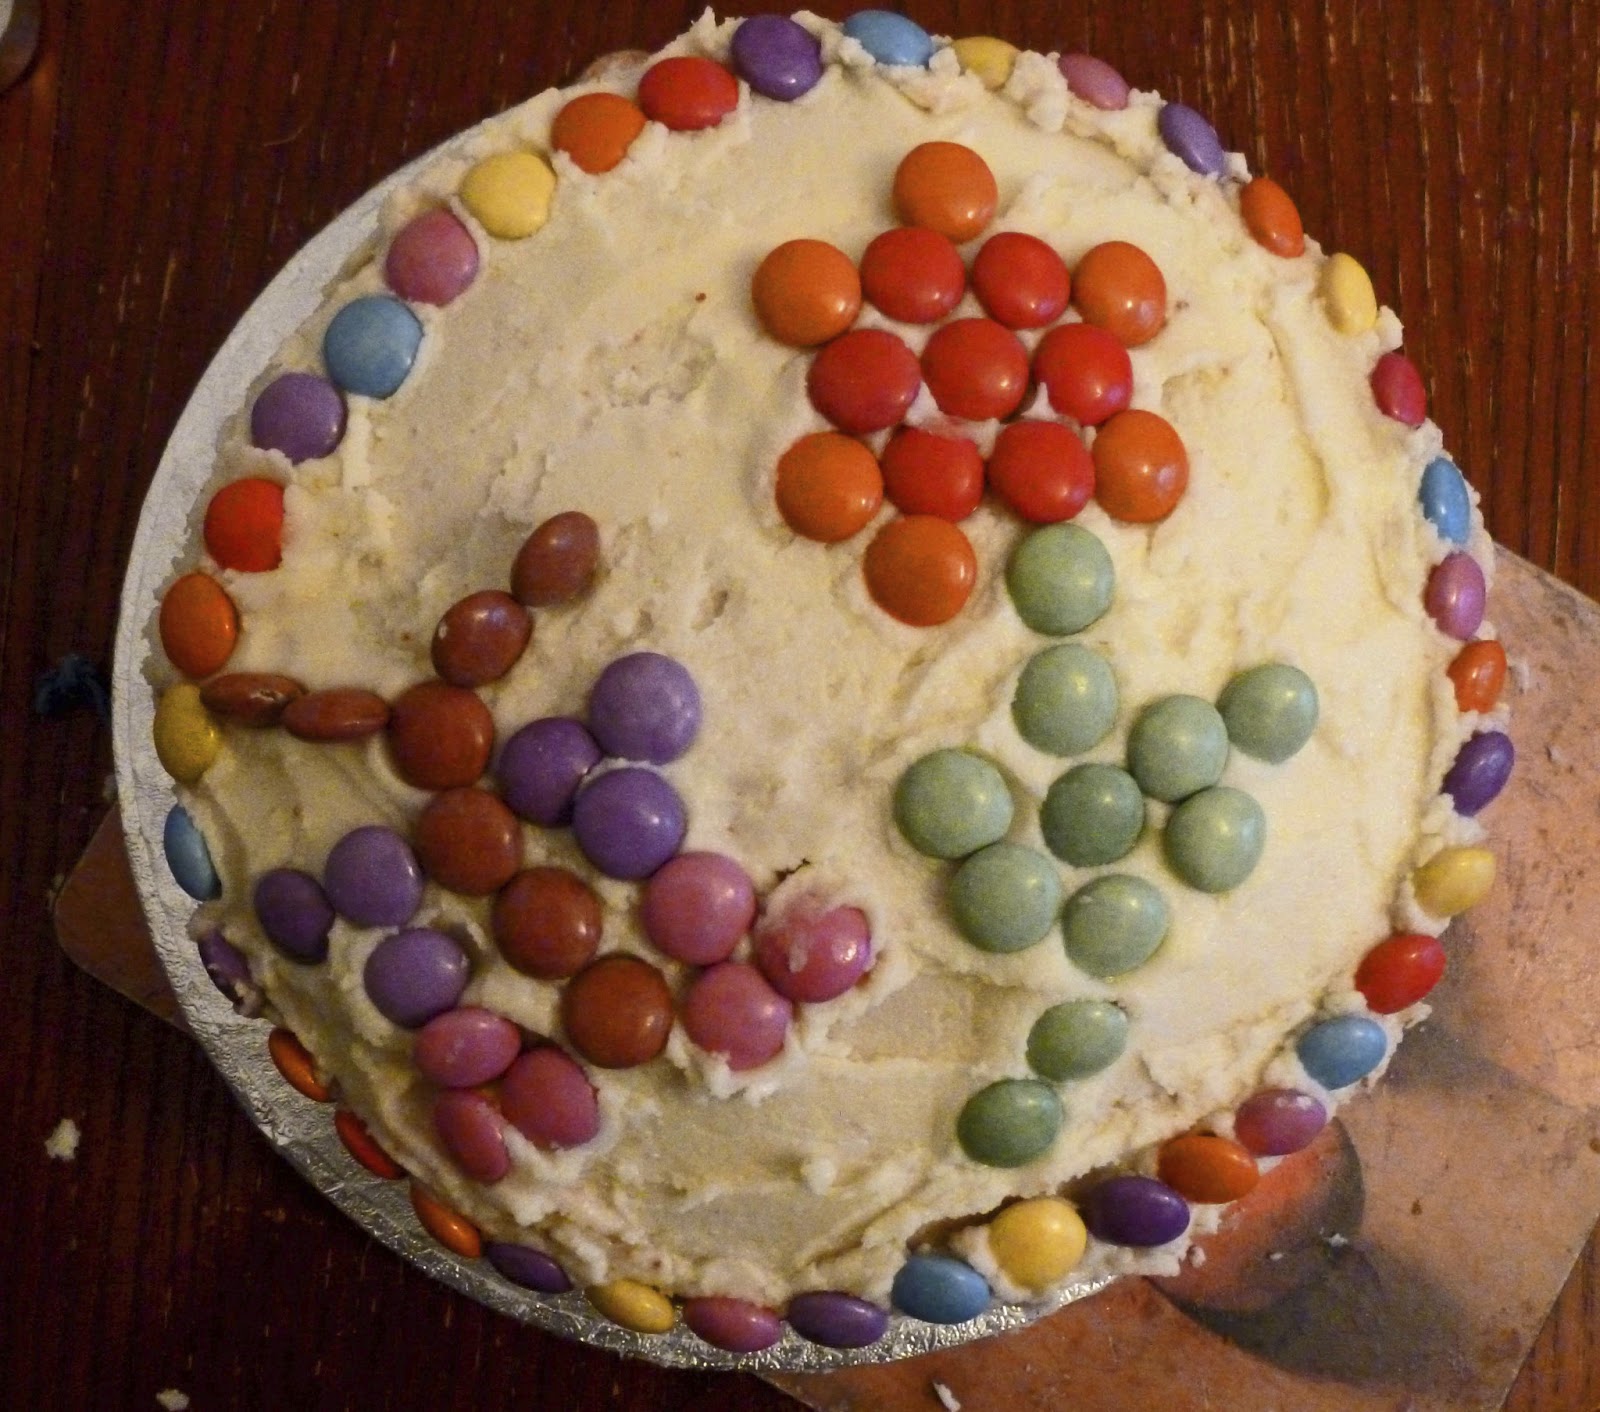 Photo of a Smartie cake, the top is decoprated with a flower and butterfly in a Smartie mosaic.